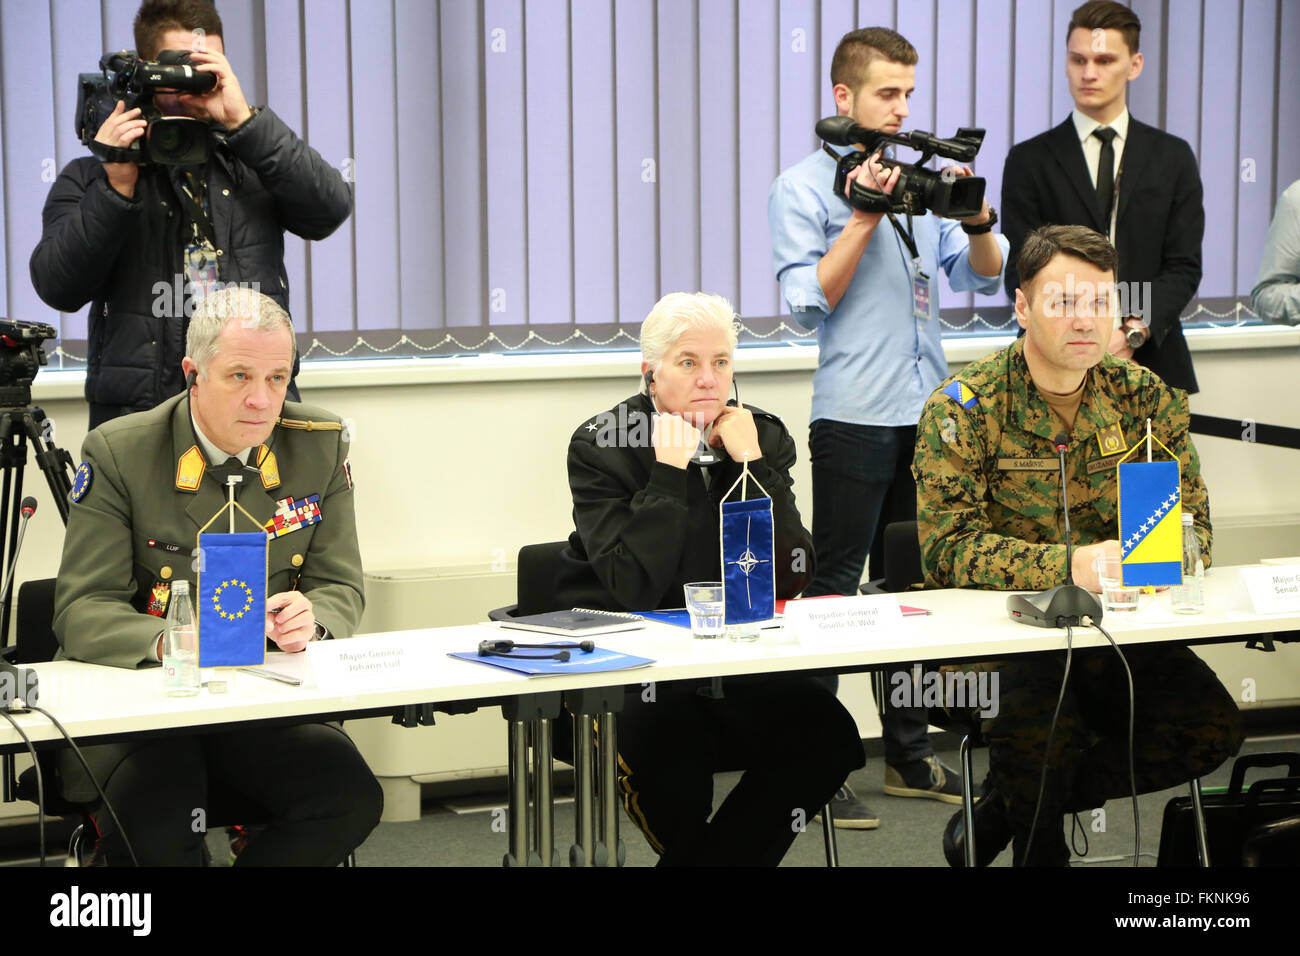 Sarajevo, BiH. 9th Mar, 2016. Commander of European Union Force (EUFOR) in Bosnia and Herzegovina (BiH) Major General Johann Luif (1st L, front), Commander of the North Atlantic Treaty Organization (NATO) Headquarters in Sarajevo Brigadier General Giselle M. Wilz (2nd L, front) attend a session of the Strategic Committee for Weapons, Ammunition and Explosive Ordnance in Sarajevo, BiH, on March 9, 2016. Credit:  Haris Memija/Xinhua/Alamy Live News Stock Photo